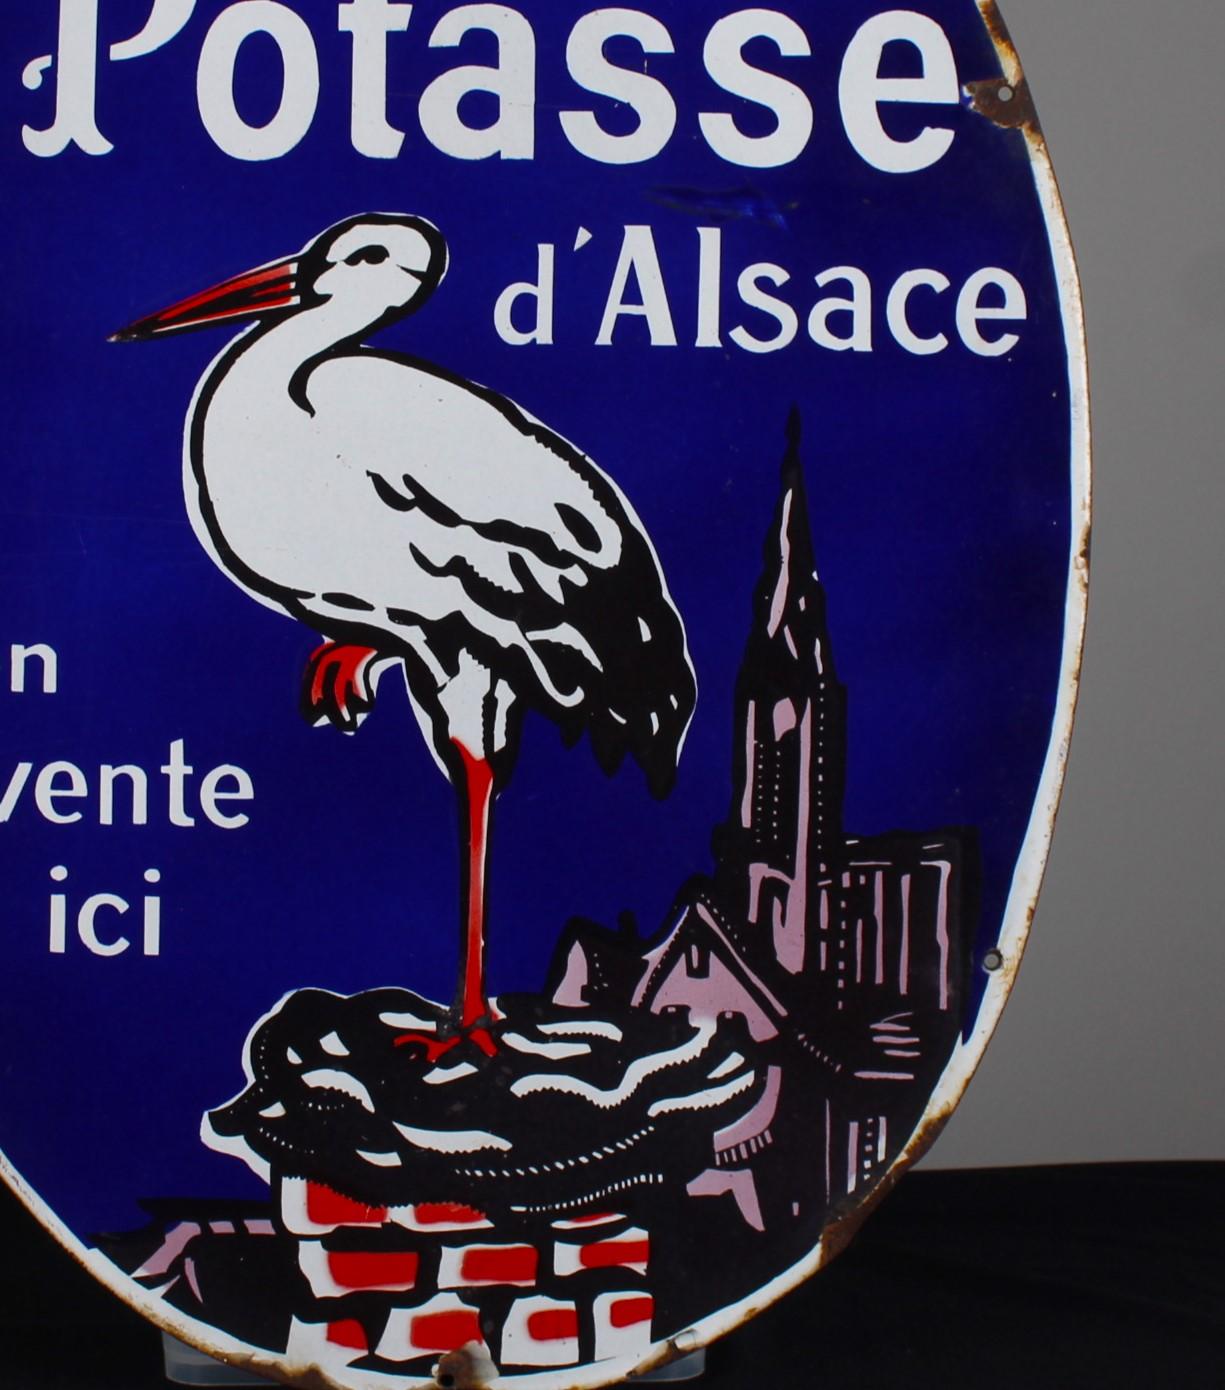 Beautiful vintage enameled sign, France, circa 1930.
With the inscription 